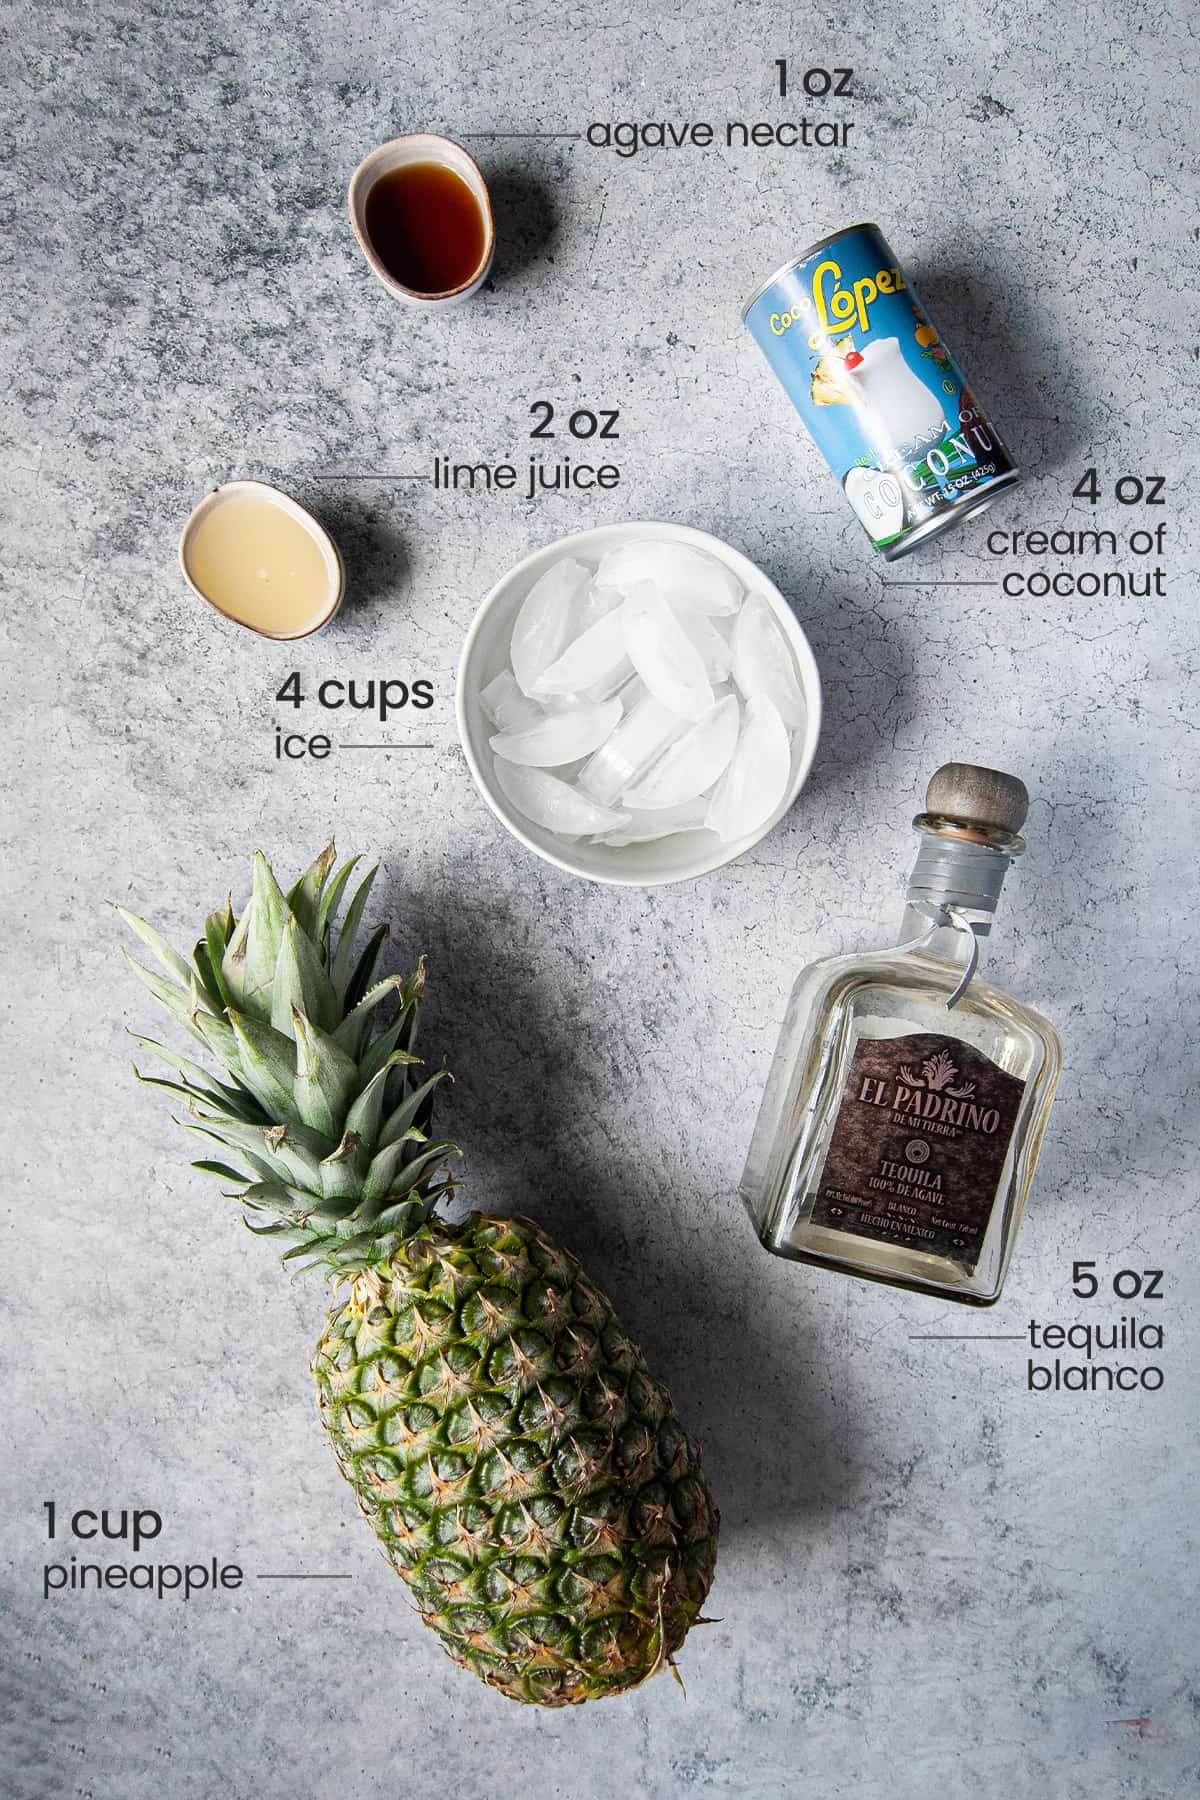 agave, lime juice, cream of coconut, ice, tequila, pineapple